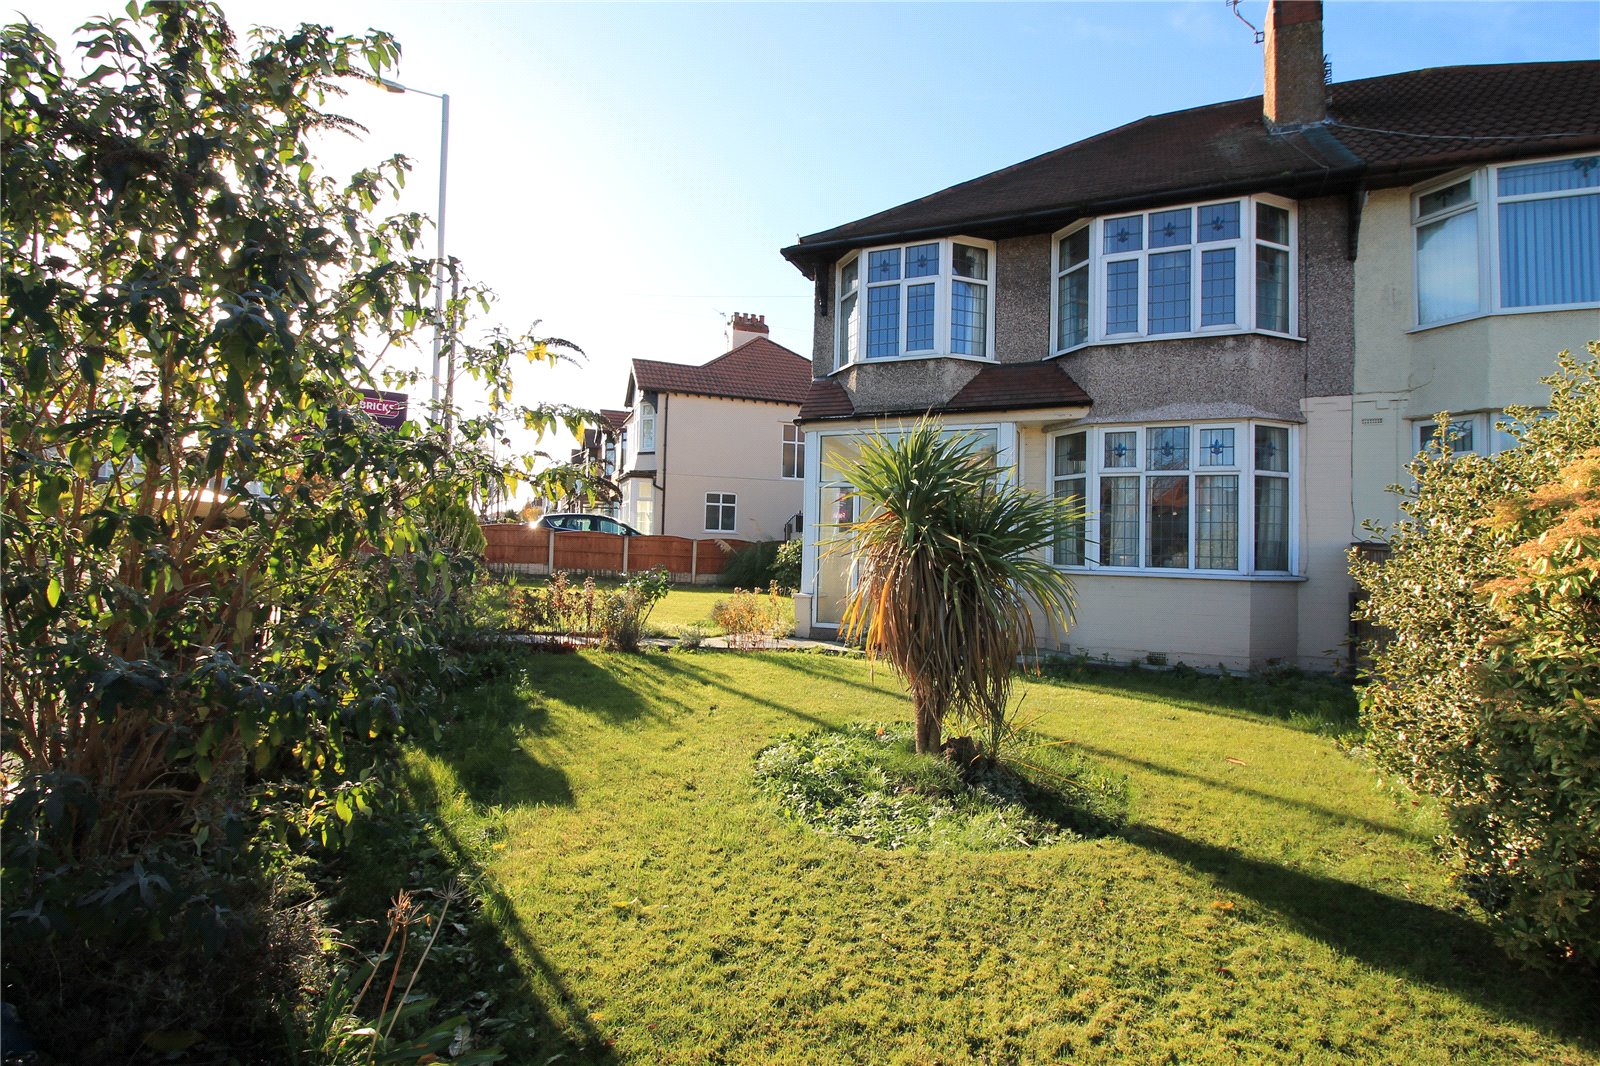 Whitegates Bootle 3 Bedroom House For Sale In Southport